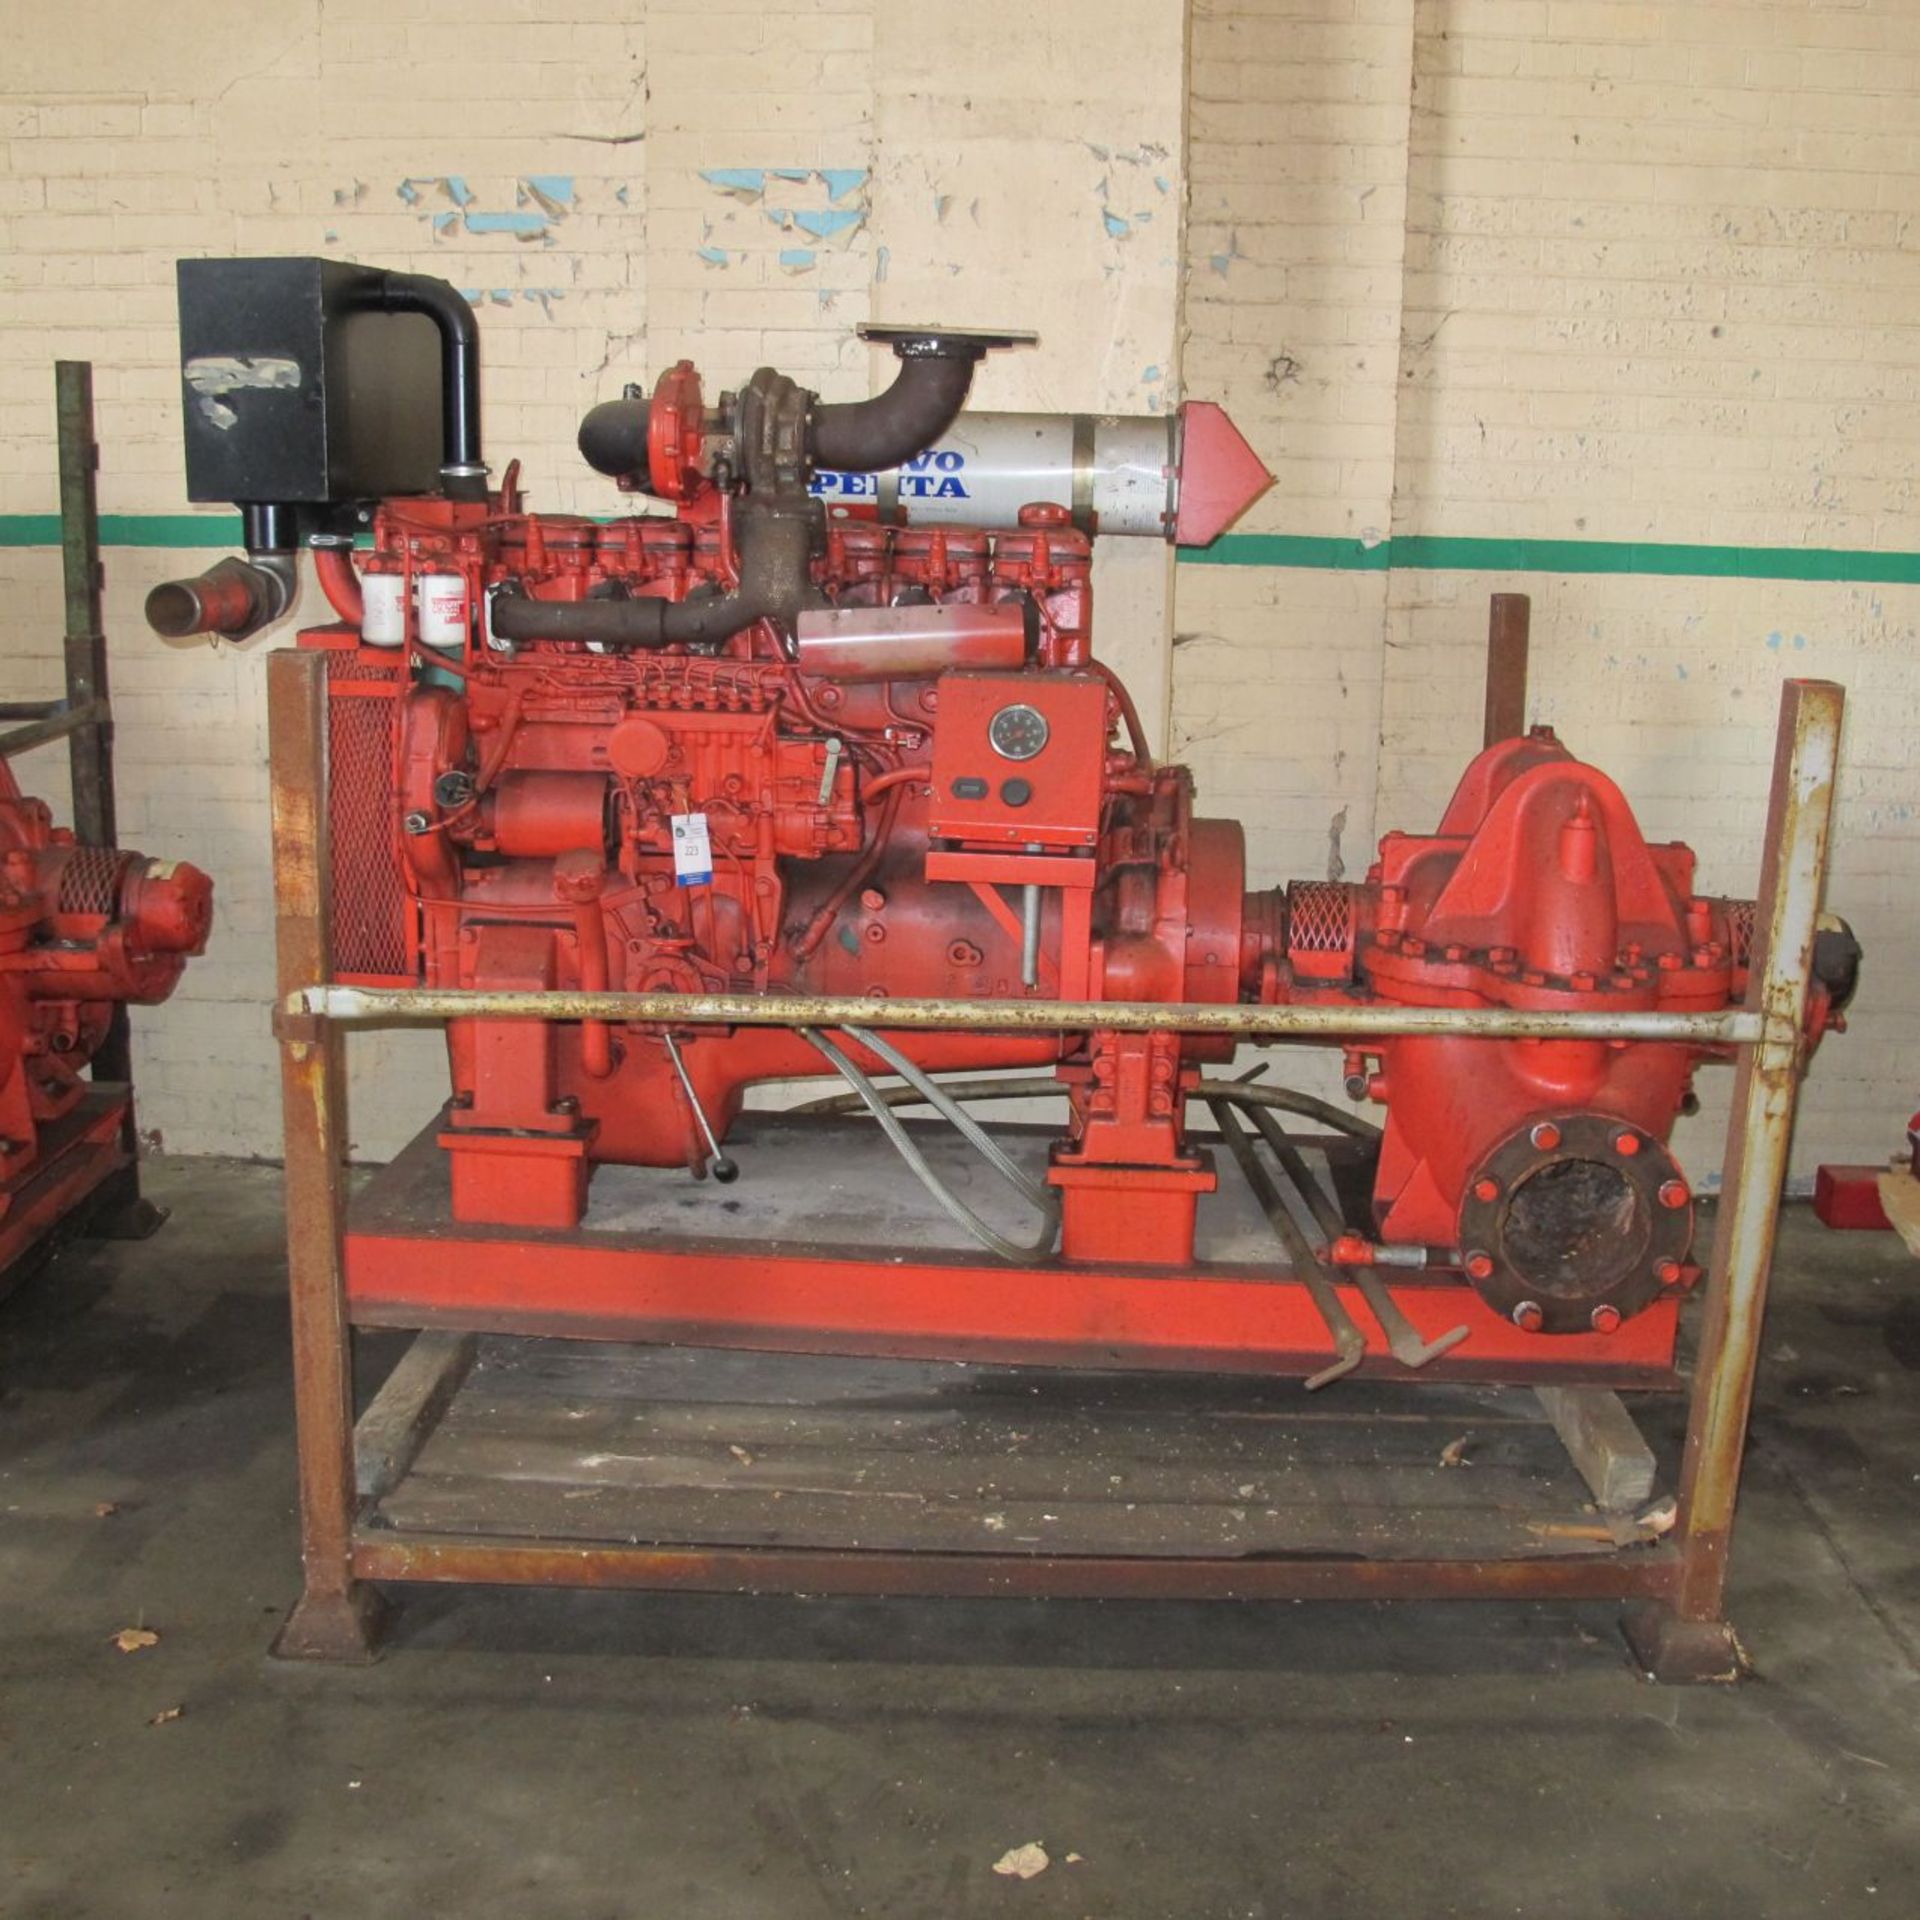 * Diesel Engined Water pump; Volvo TD100, 6cyl Turbo, Mather & Pitt Pump, Model 8/8CMEB, Size